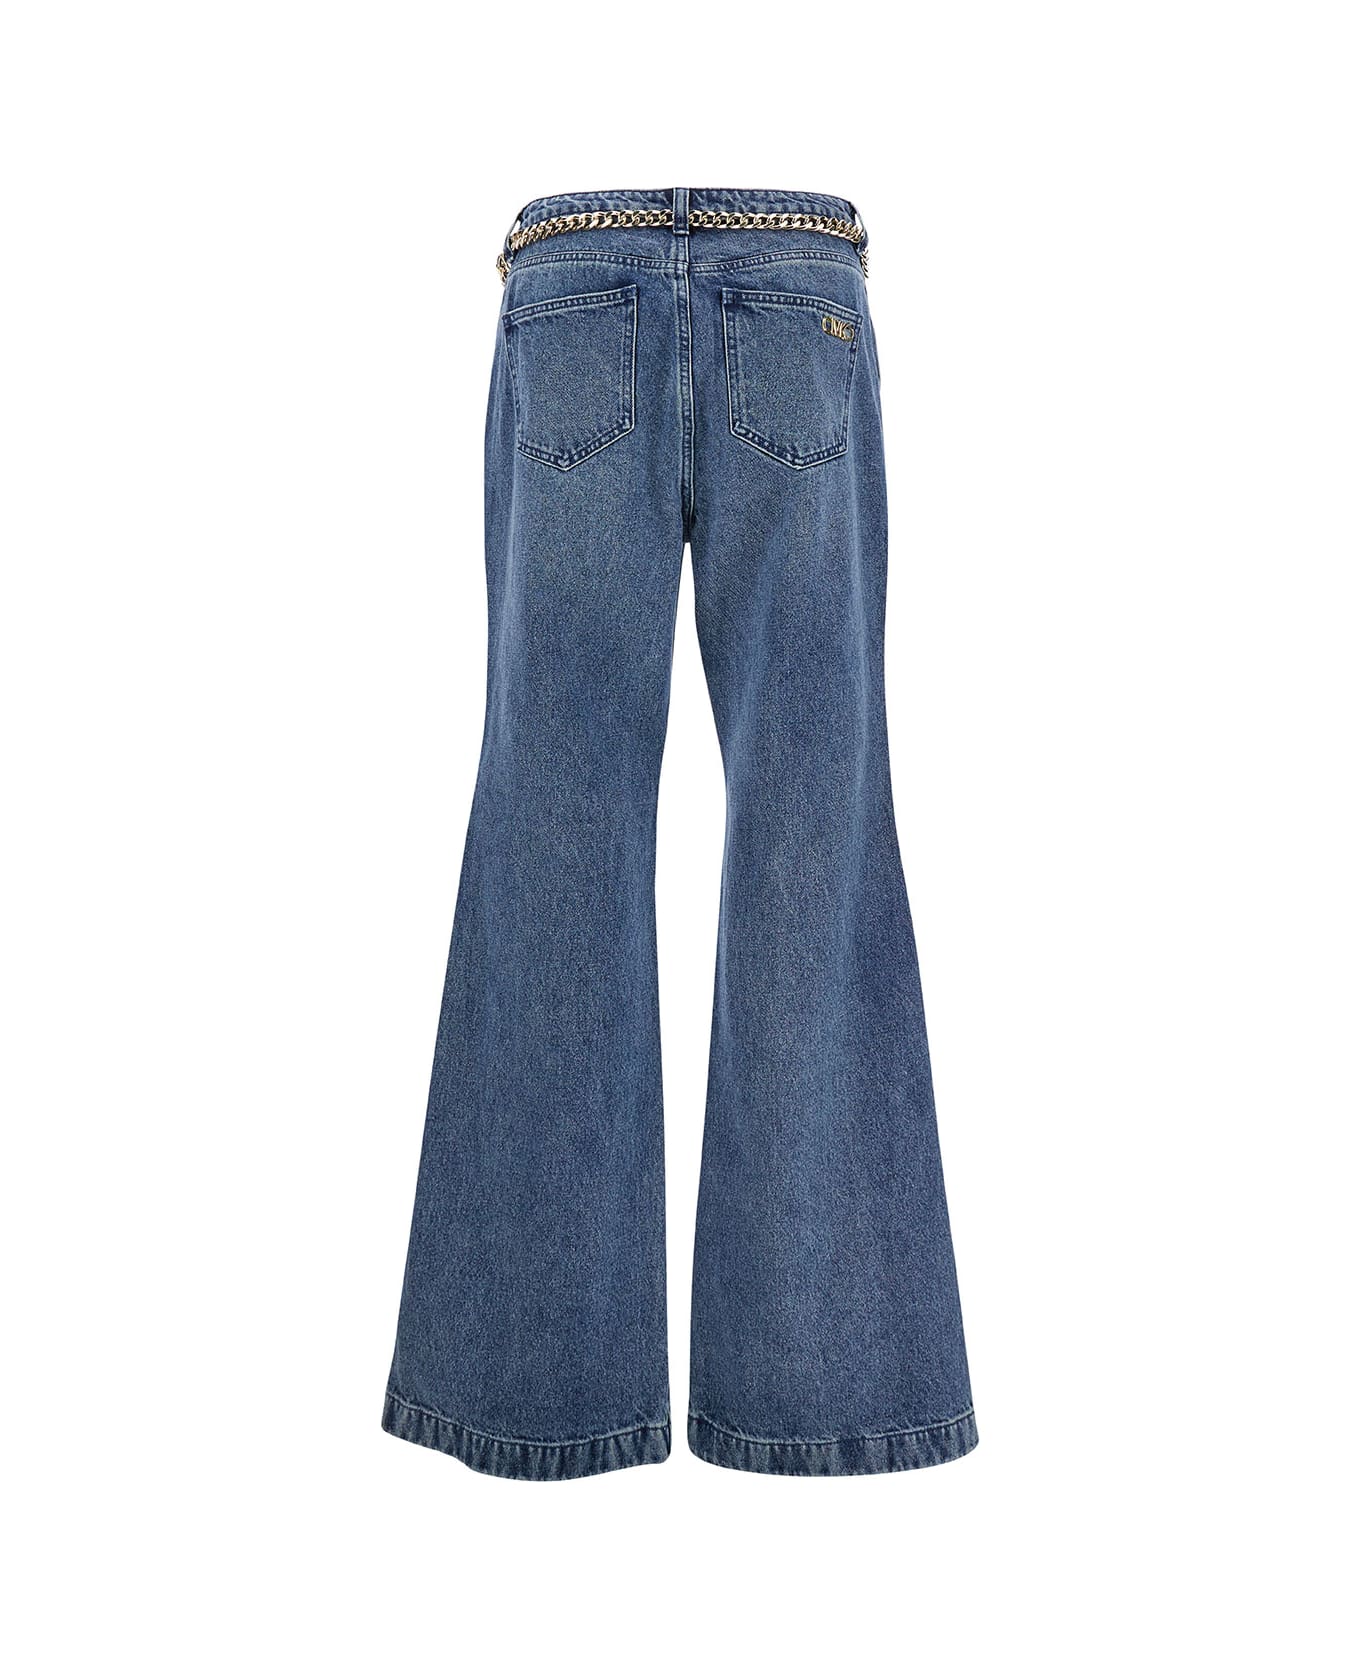 Michael Kors Collection Blue Flared Jeans With Chain Belt In Denim Woman - Duskbluewash デニム